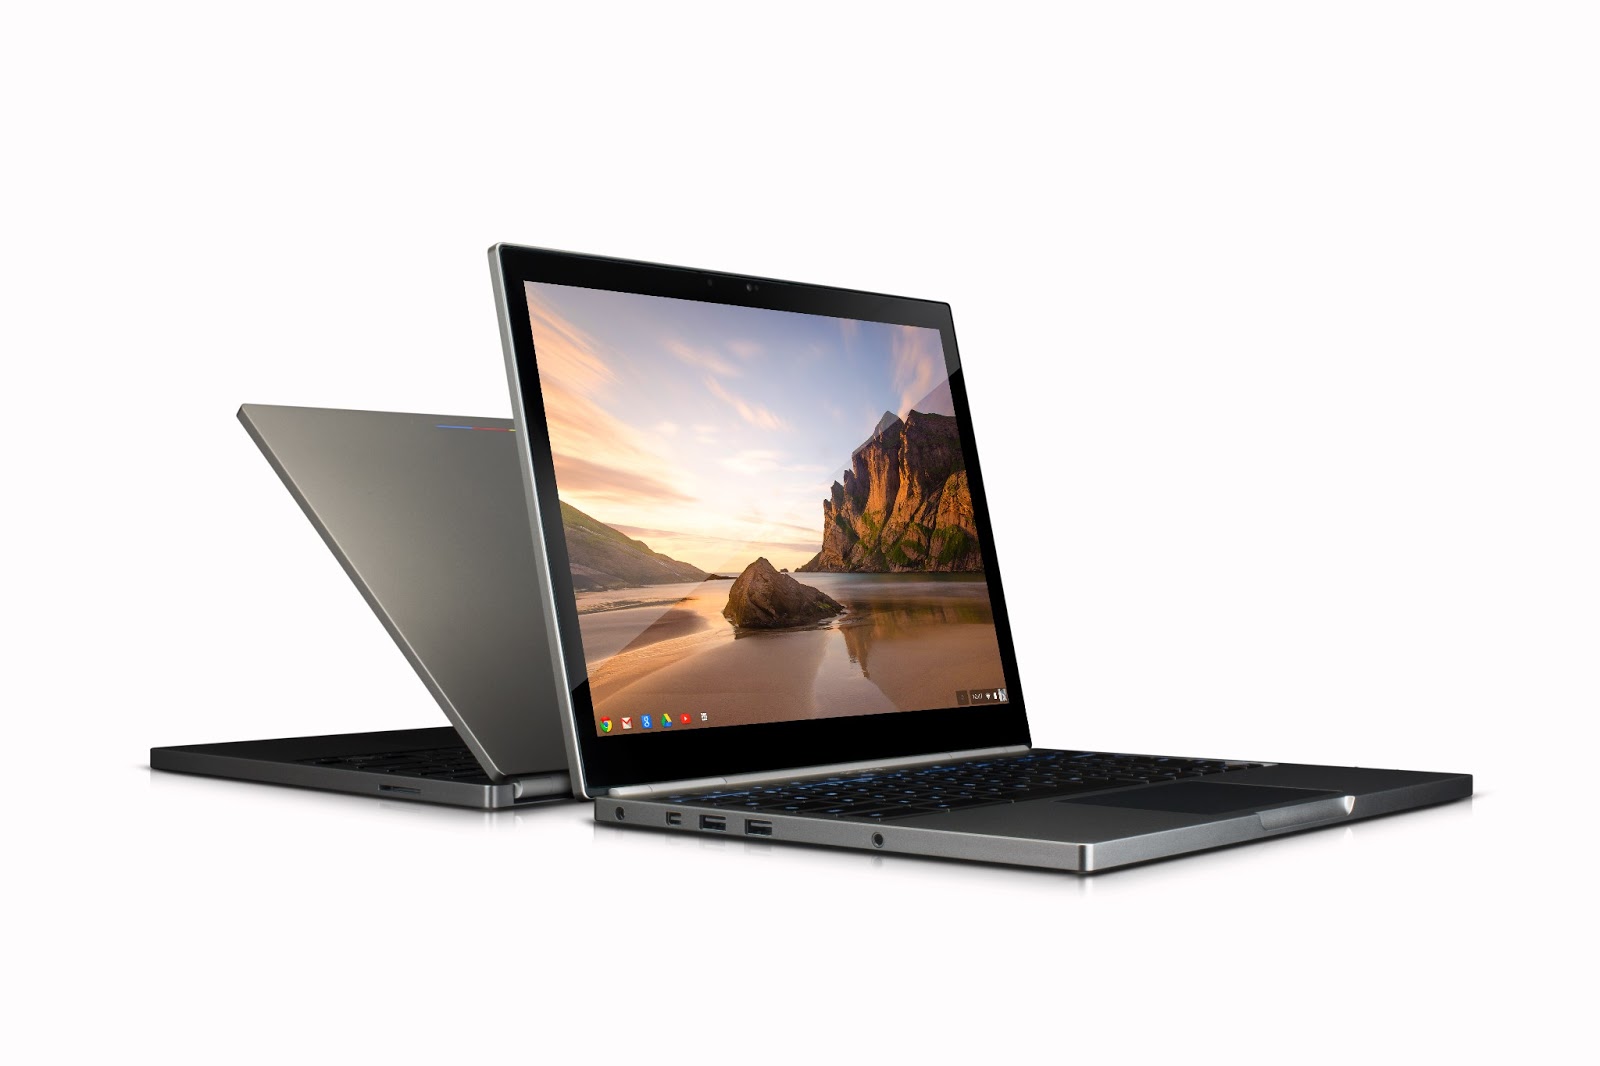 ZDNet Great Debate results: There are good reasons to buy a Chromebook